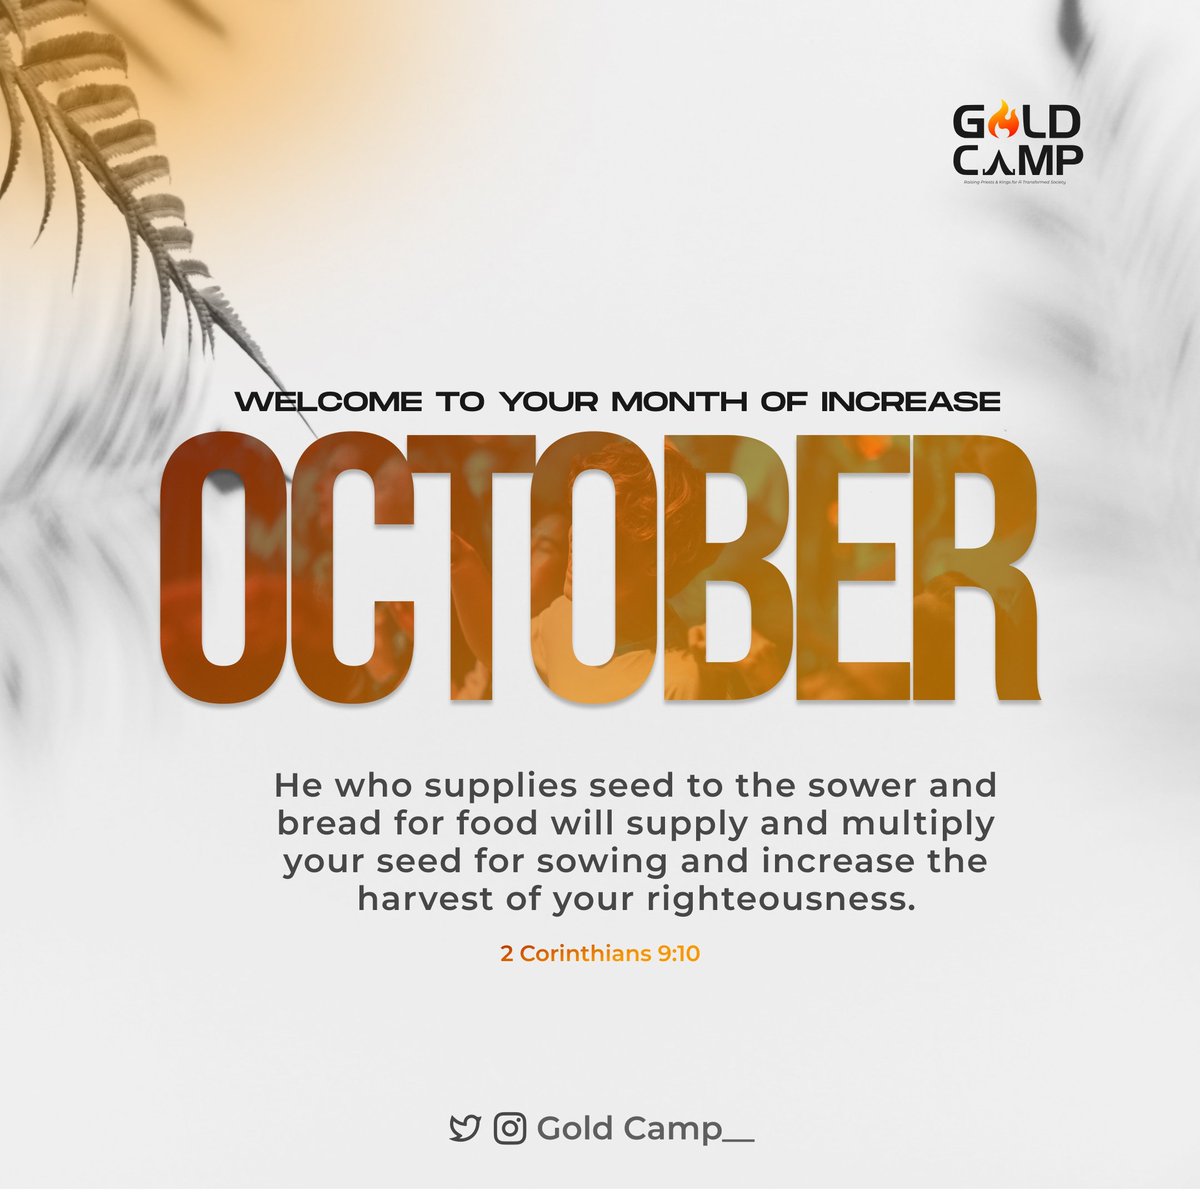 Welcome to the last quarter of 2023!

It's been an amazing year.

May this last quarter be fruitful and bring bountiful blessings your way.

Happy new month

#october #october2023 #happynewmonth #Goldcamp #youthministry #kingsandpriests #raisingkings  #transform